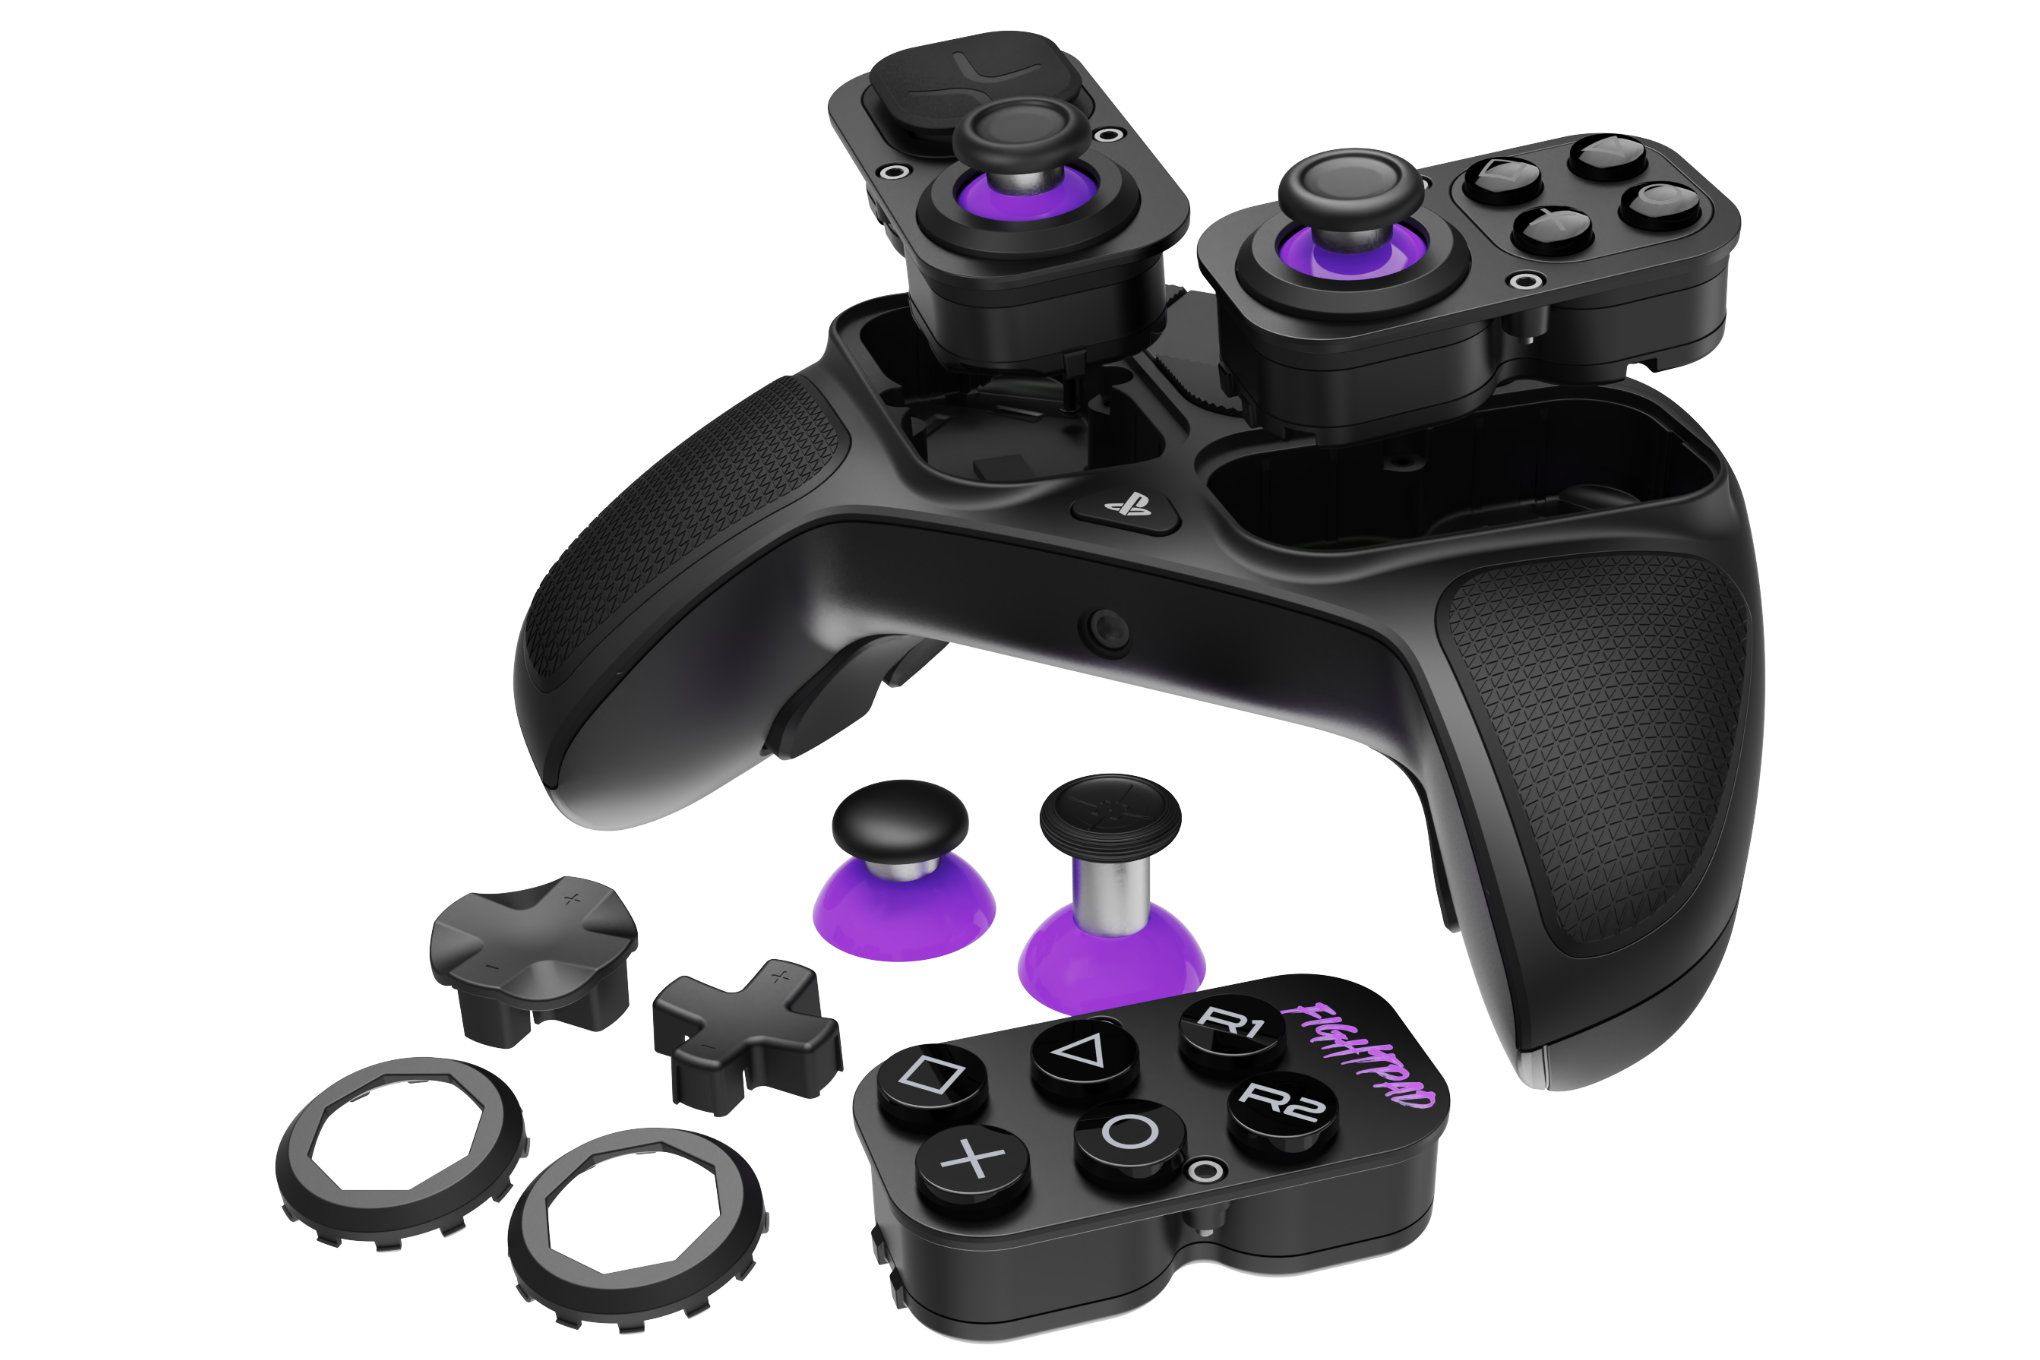 Victrix's Pro BFG for PS5 can transform into a portable fight